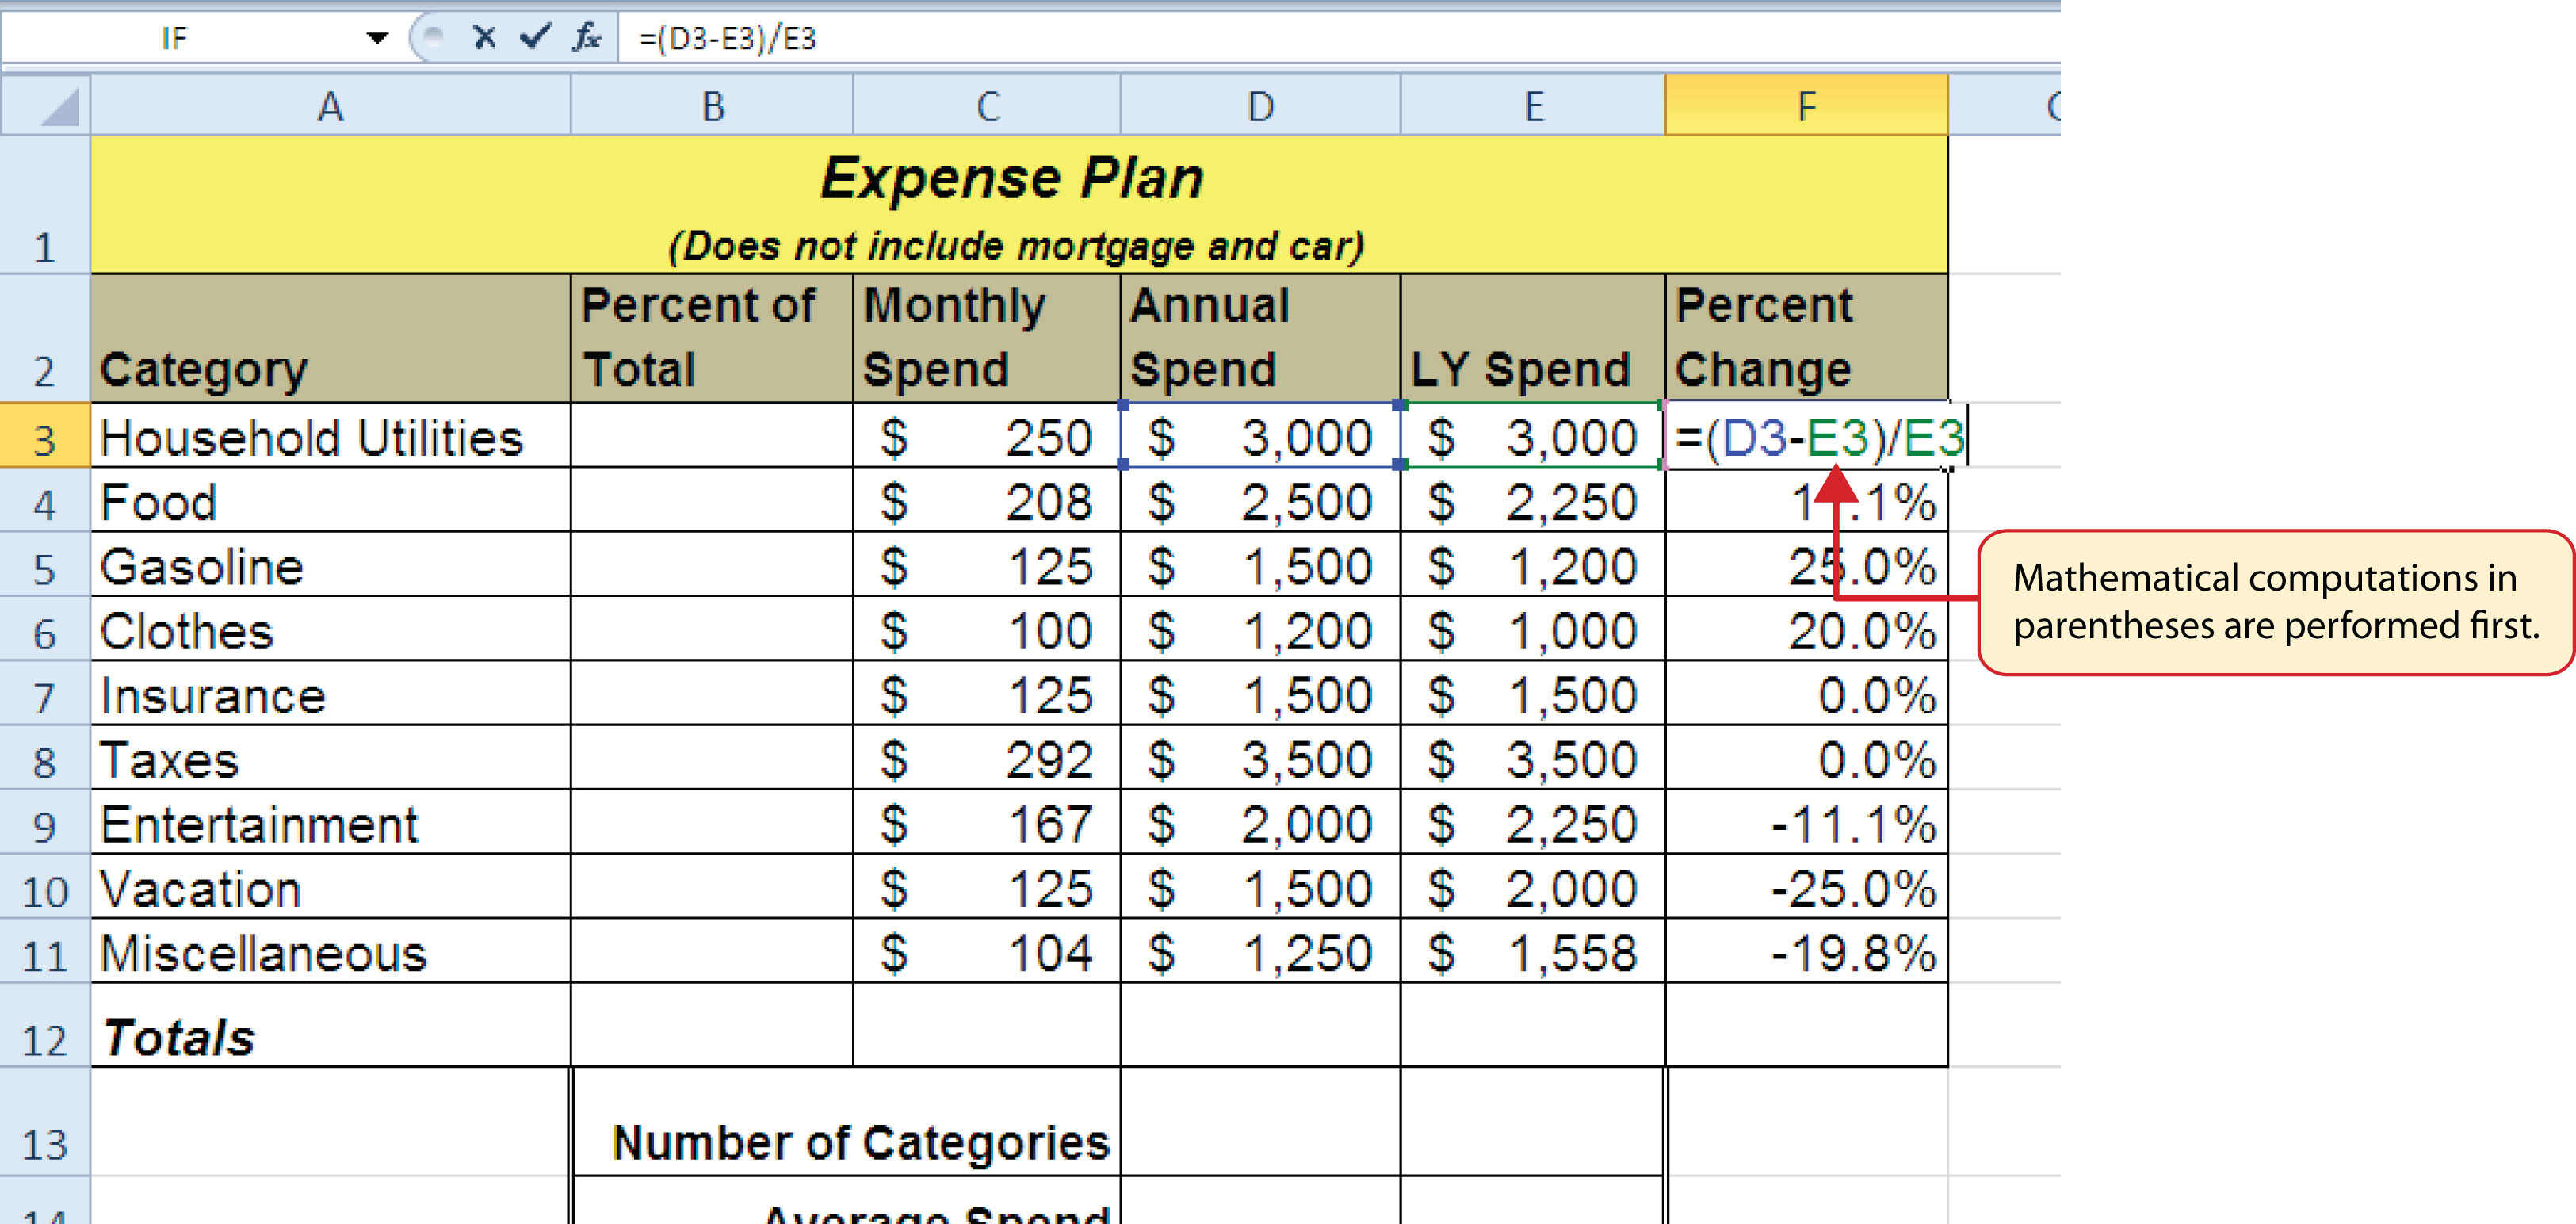 changing-the-order-of-operations-in-excel-formulas